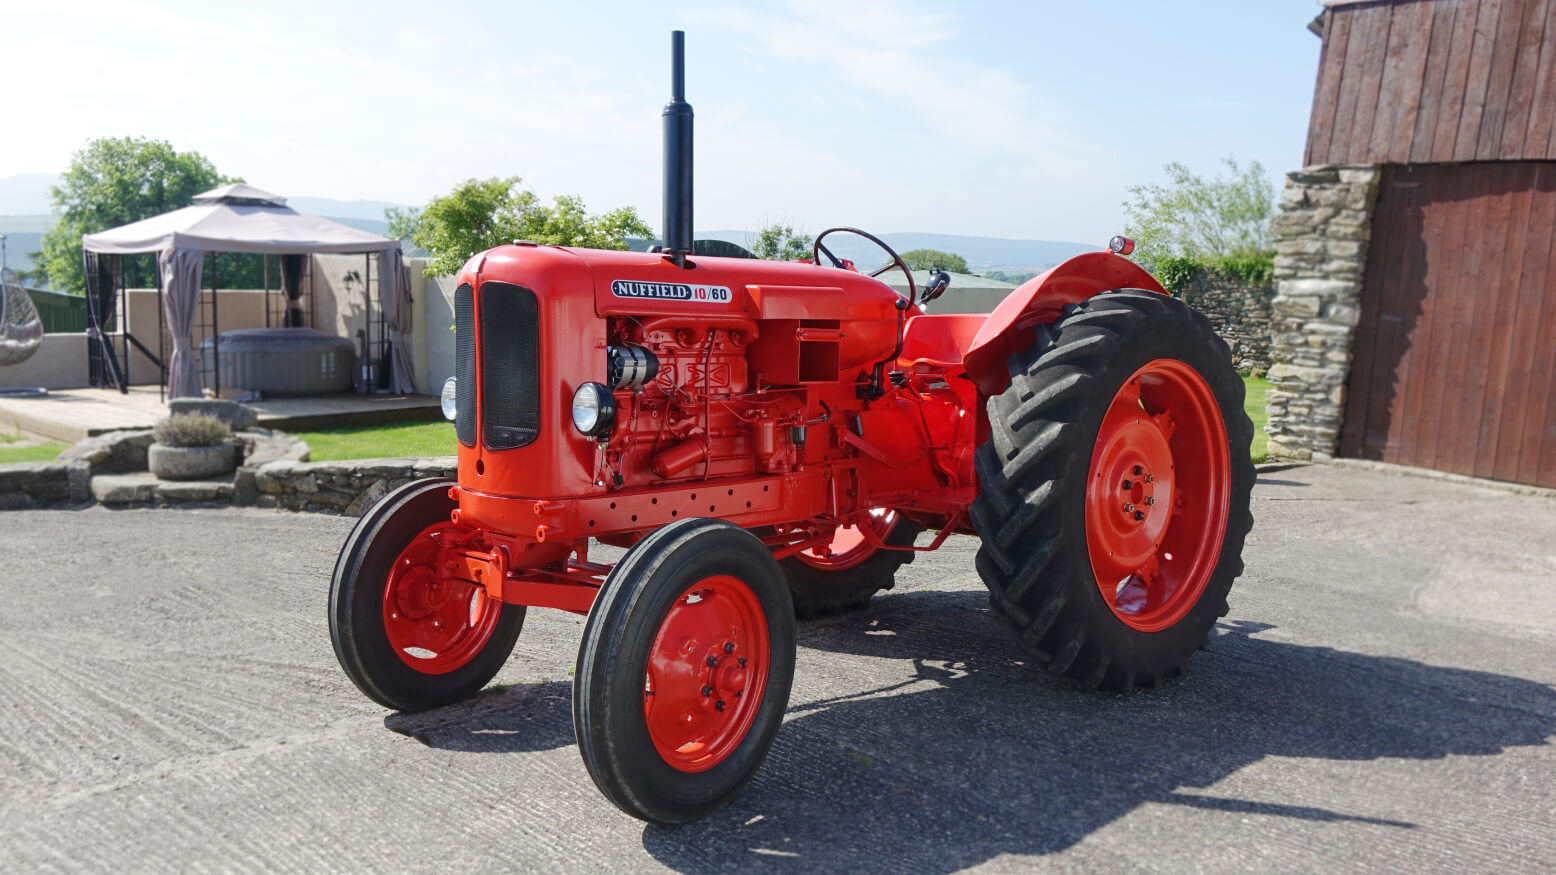 1967 Nuffield 10/60 Tractor